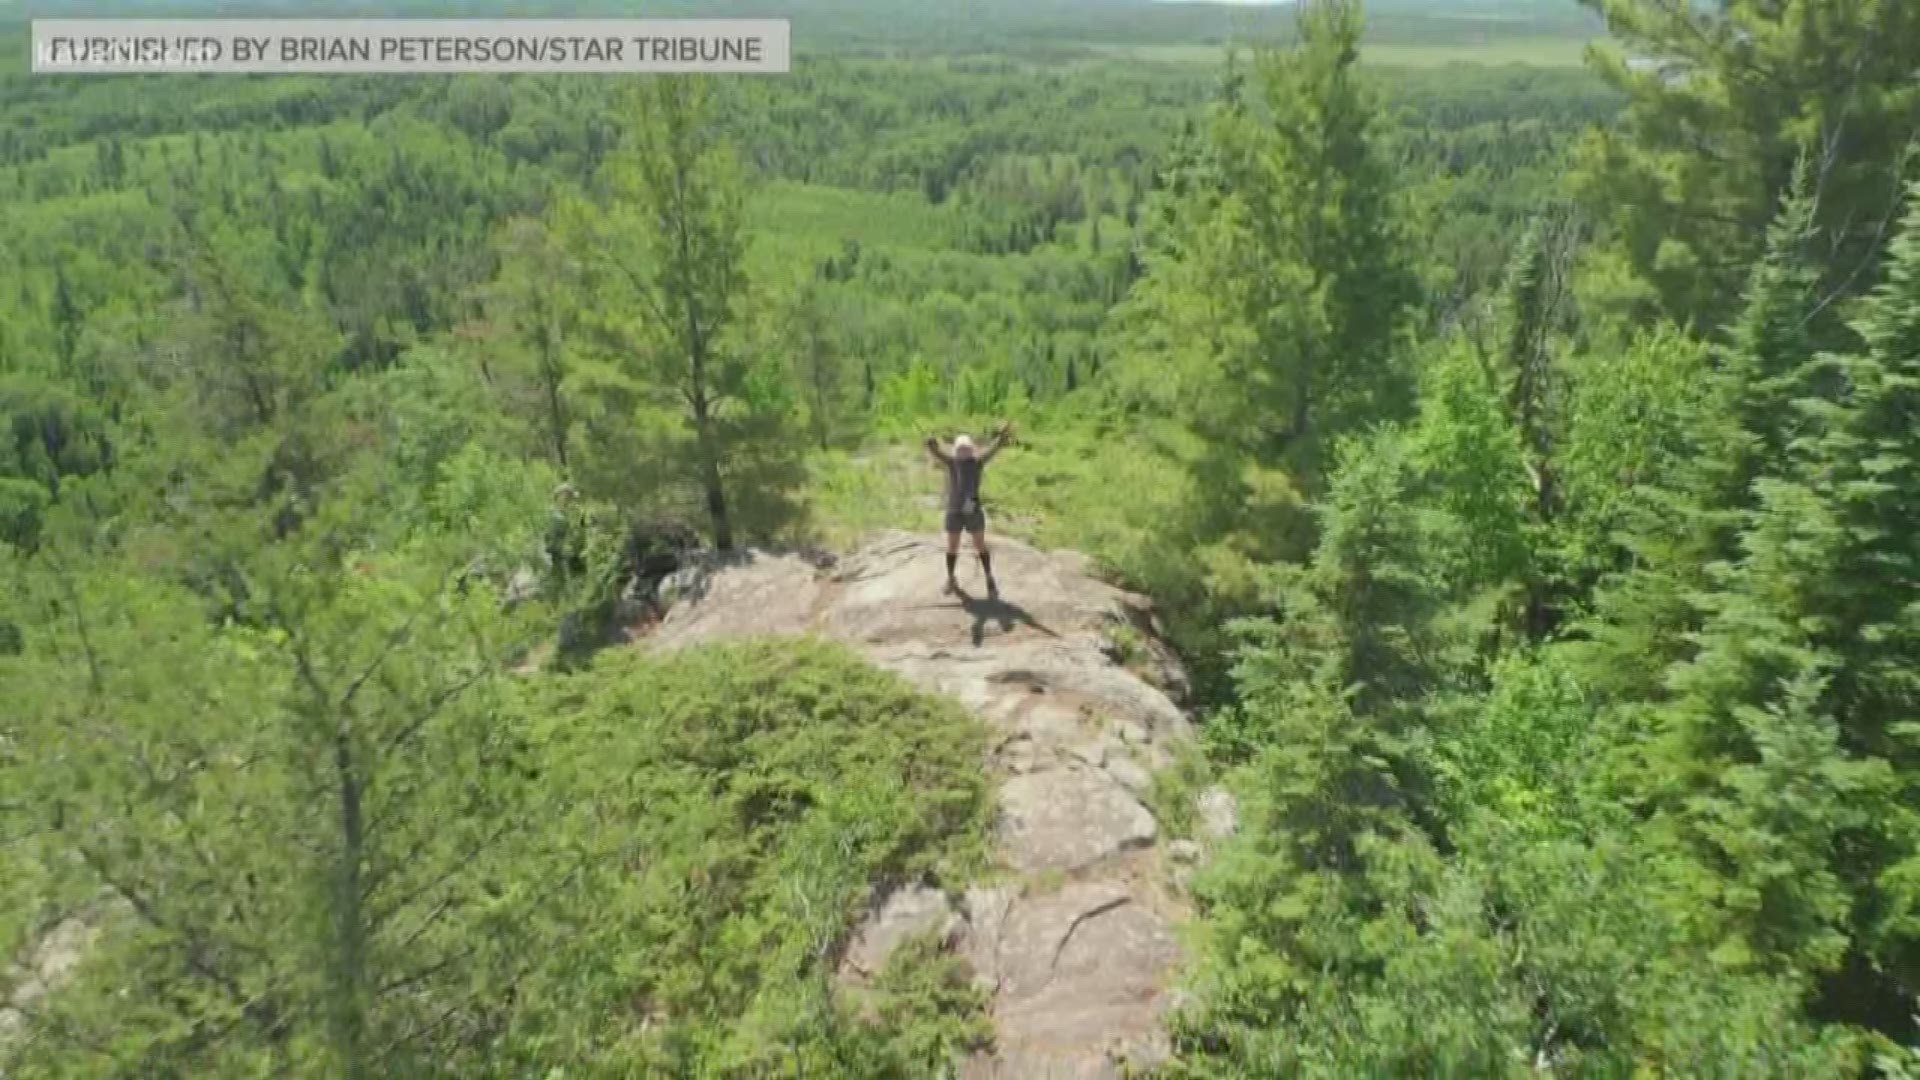 Though often overlooked, the Superior Hiking Trail offers a breathtaking view of Minnesota wilderness. KARE 11's Ellery McCardle spoke with the Star Tribune reporters showing off the trail's beauty. https://kare11.tv/2OyWgTP